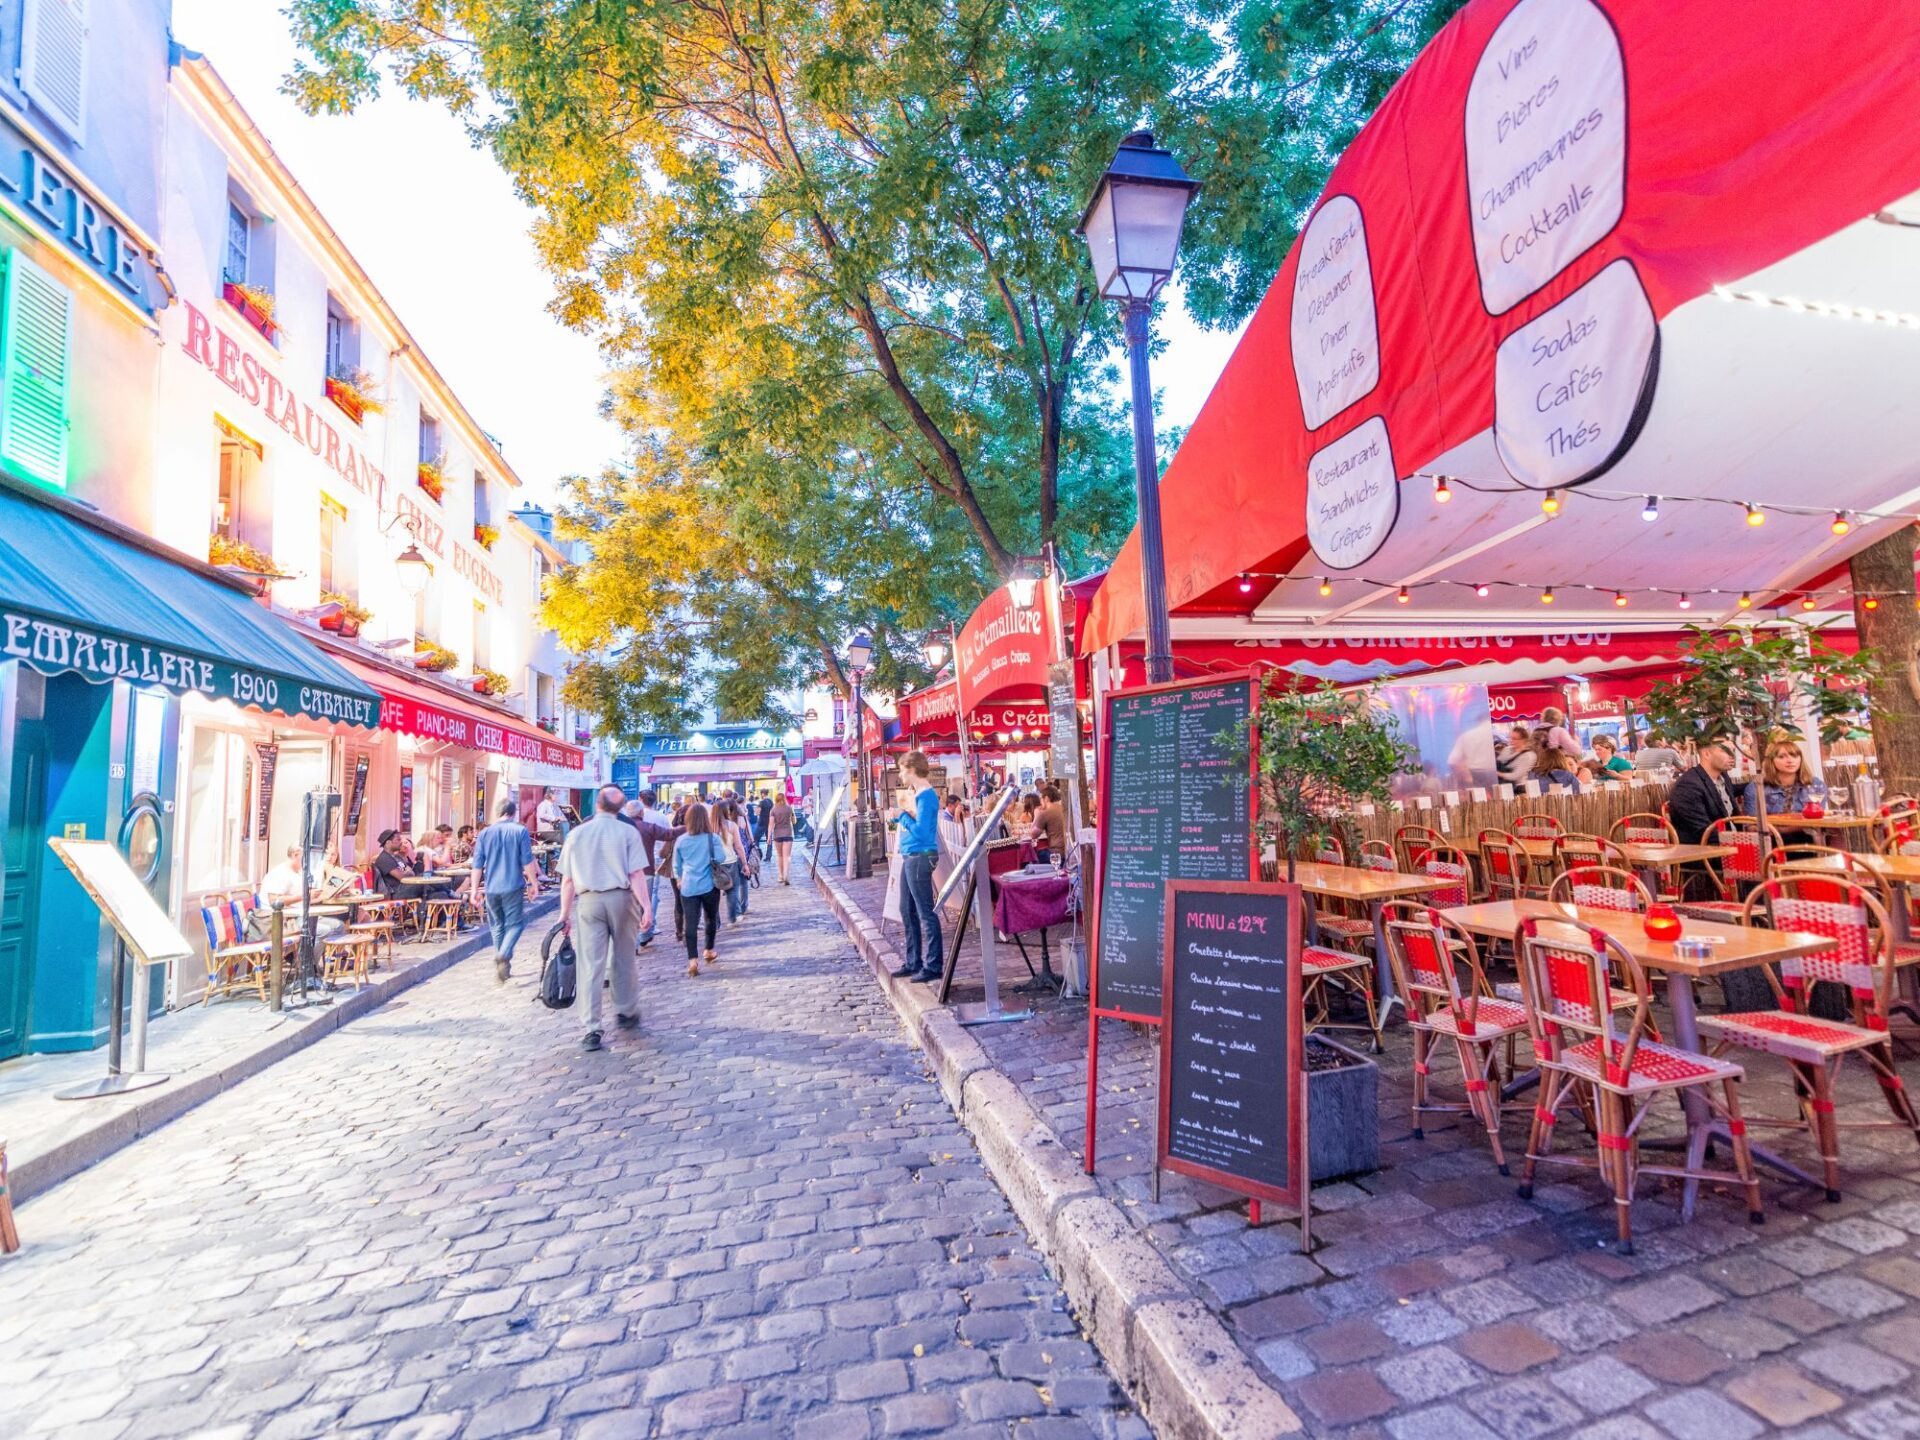 Things to do in Paris - Explore Montmartre